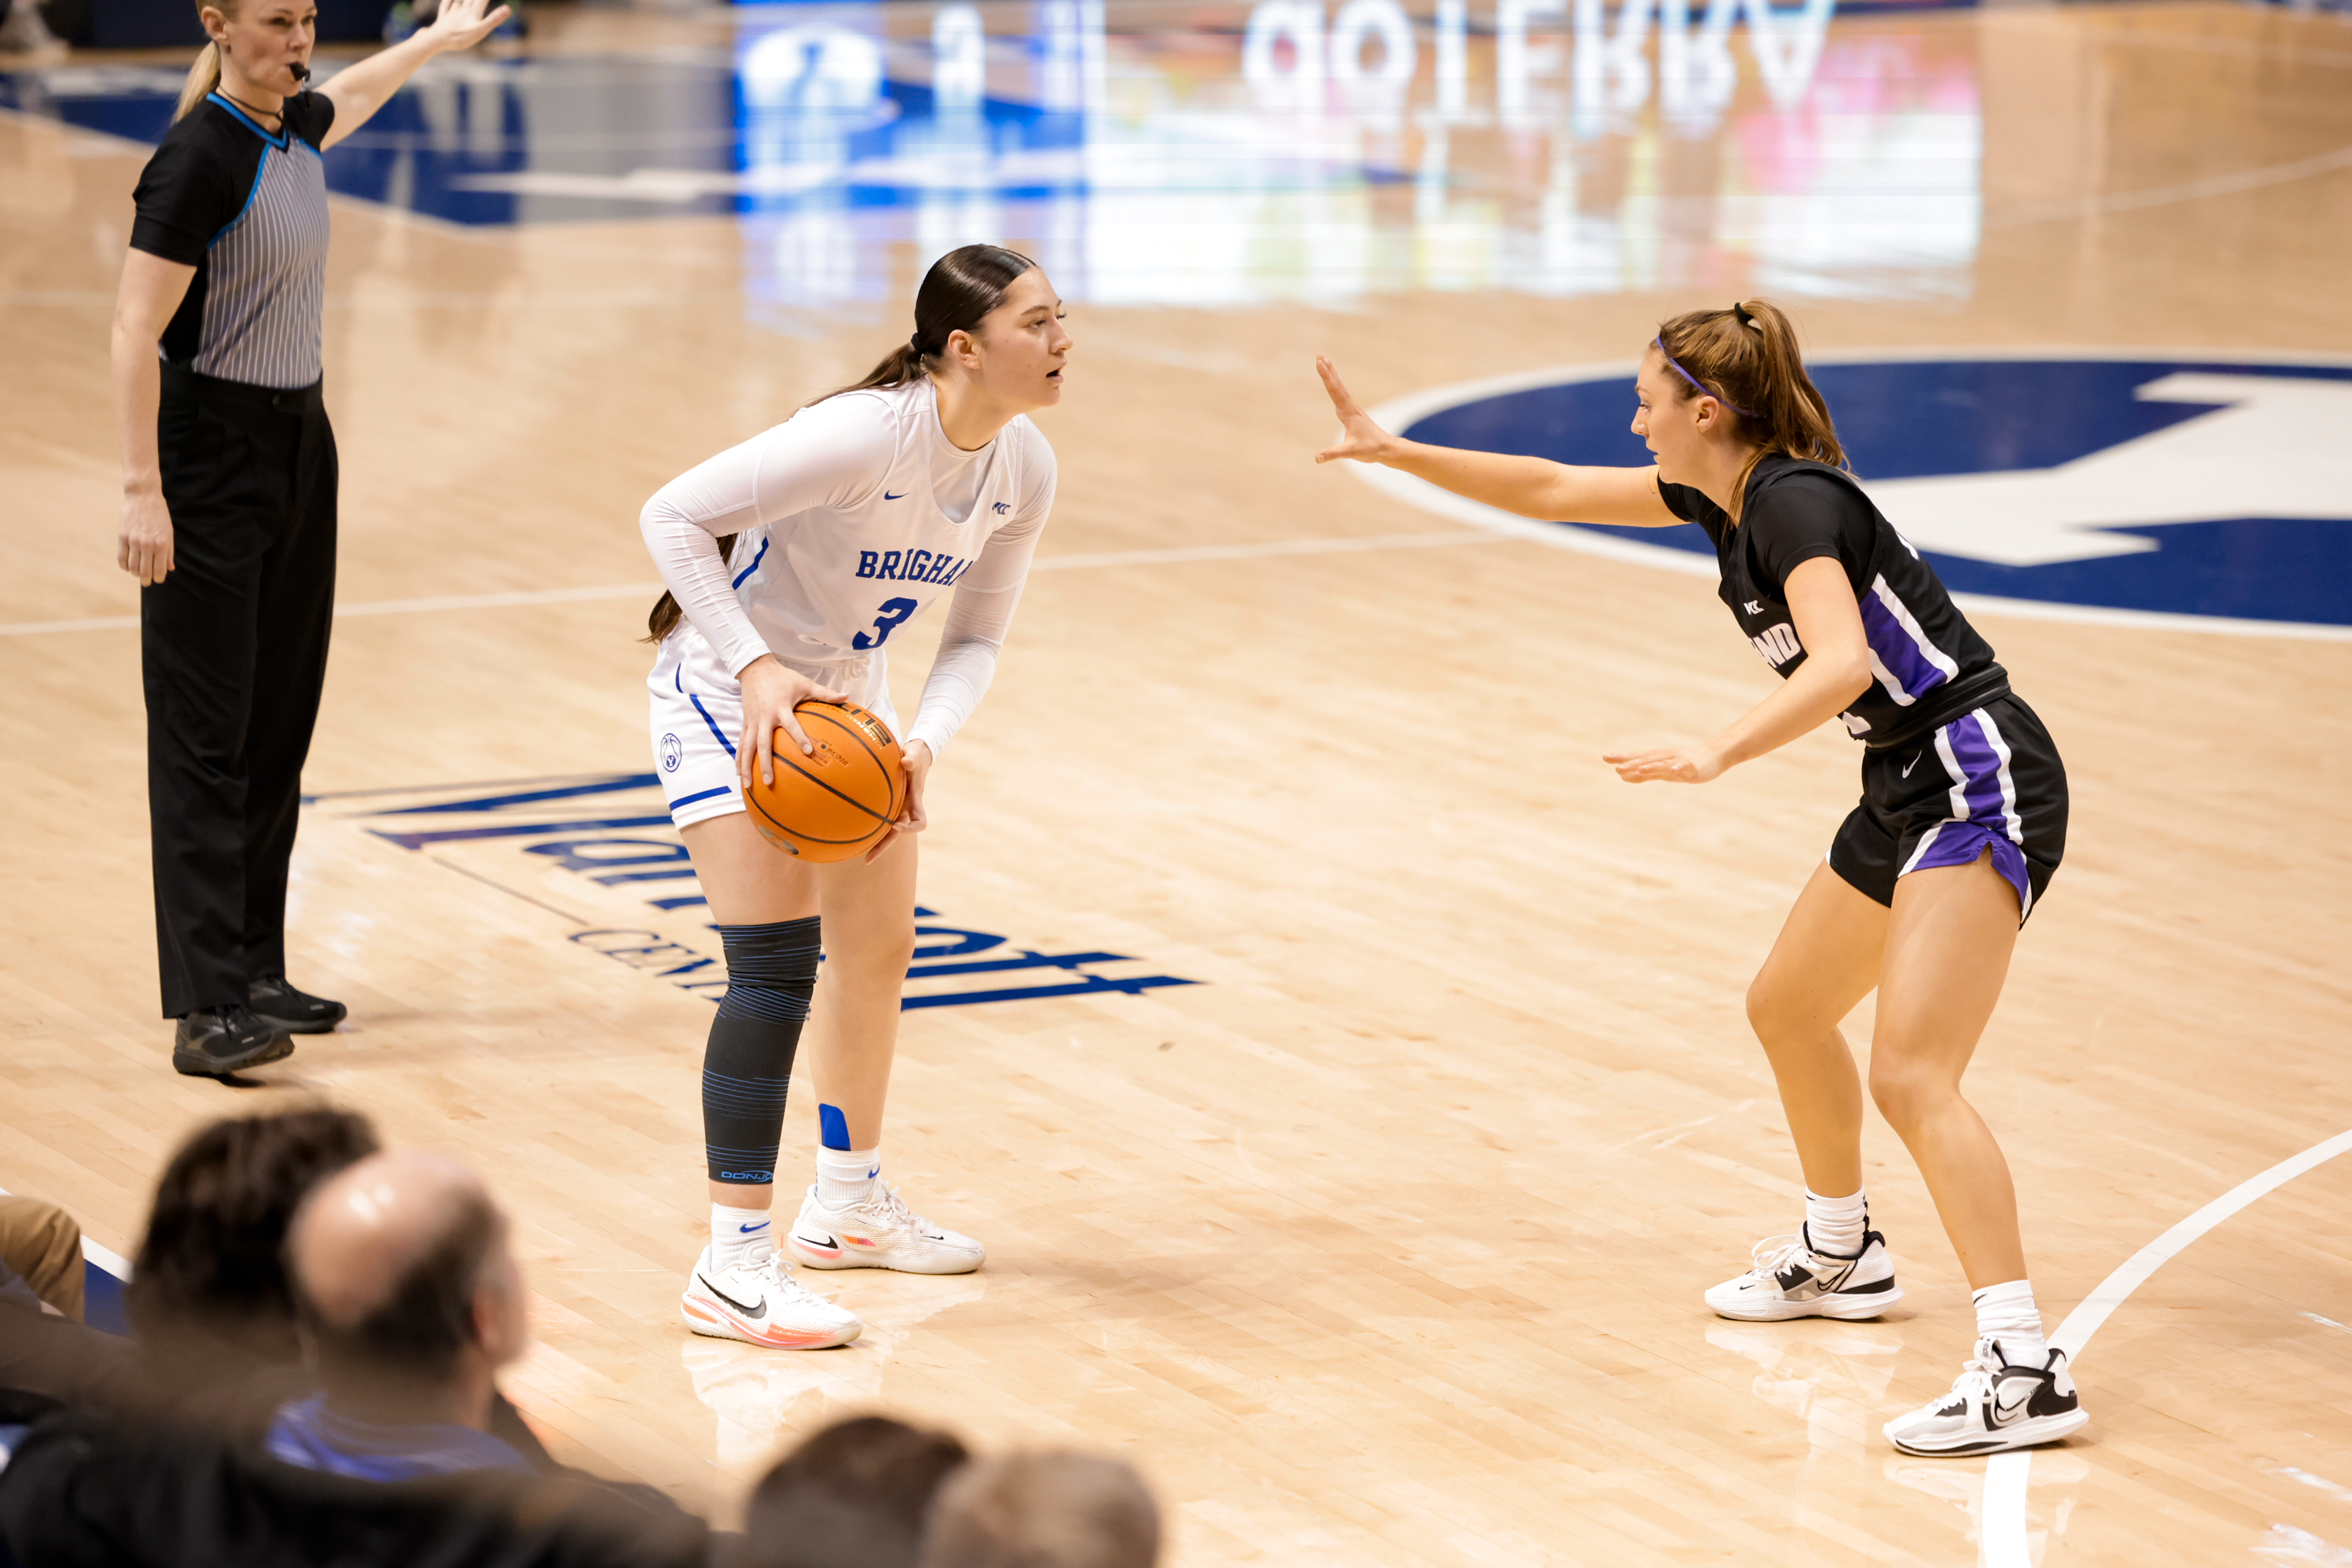 Nani Falatea sets up the offense during a game against Portland at the Marriott Center.